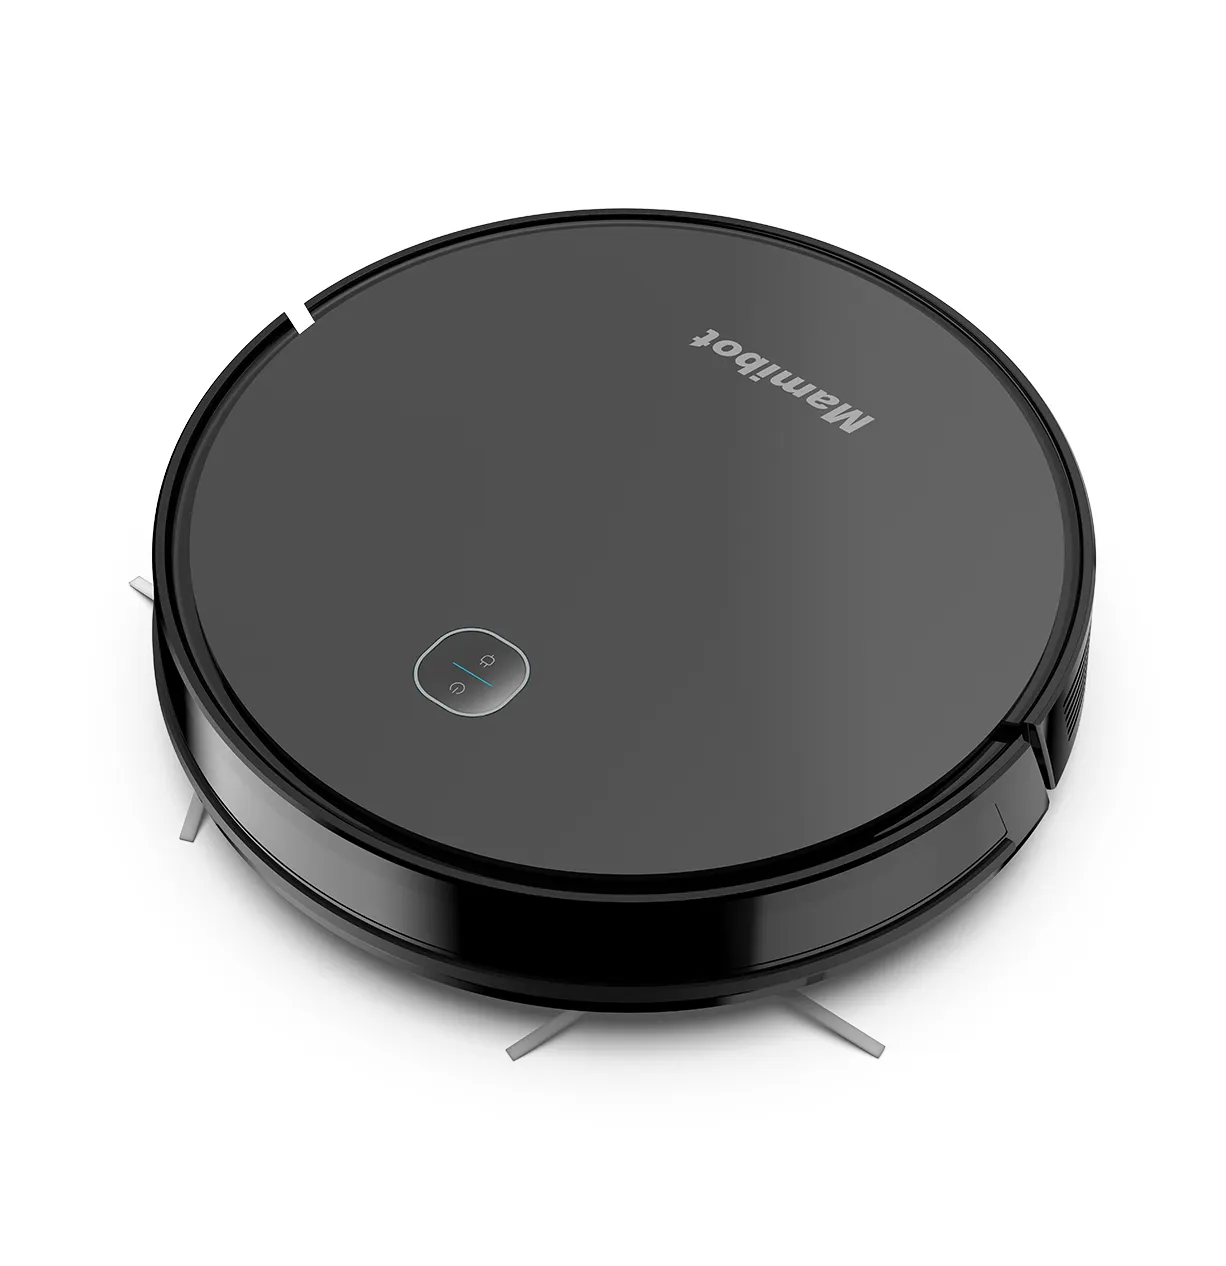 2022 NEW MAMIBOT 6th generation Gyro-navi EXVAC700 robot vacuum cleaner, 4 levels suction power and multiple cleaning modes